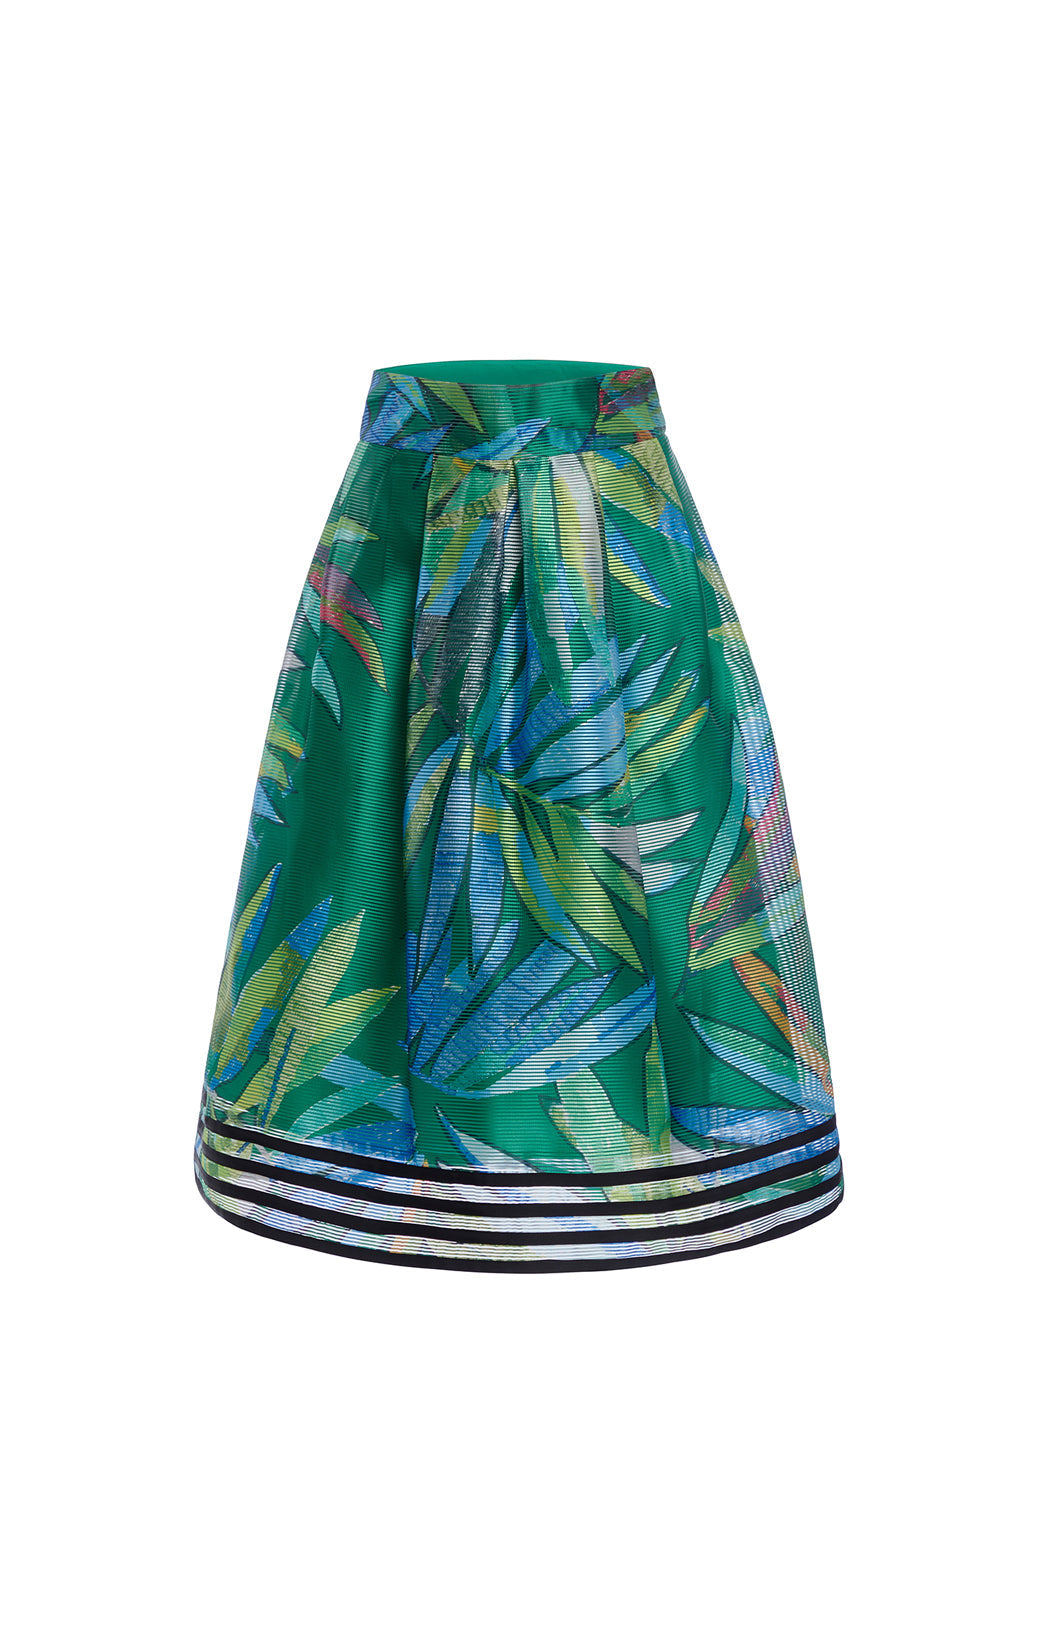 Iberia - Embroidered White Cotton Sateen Skirt - Product Image